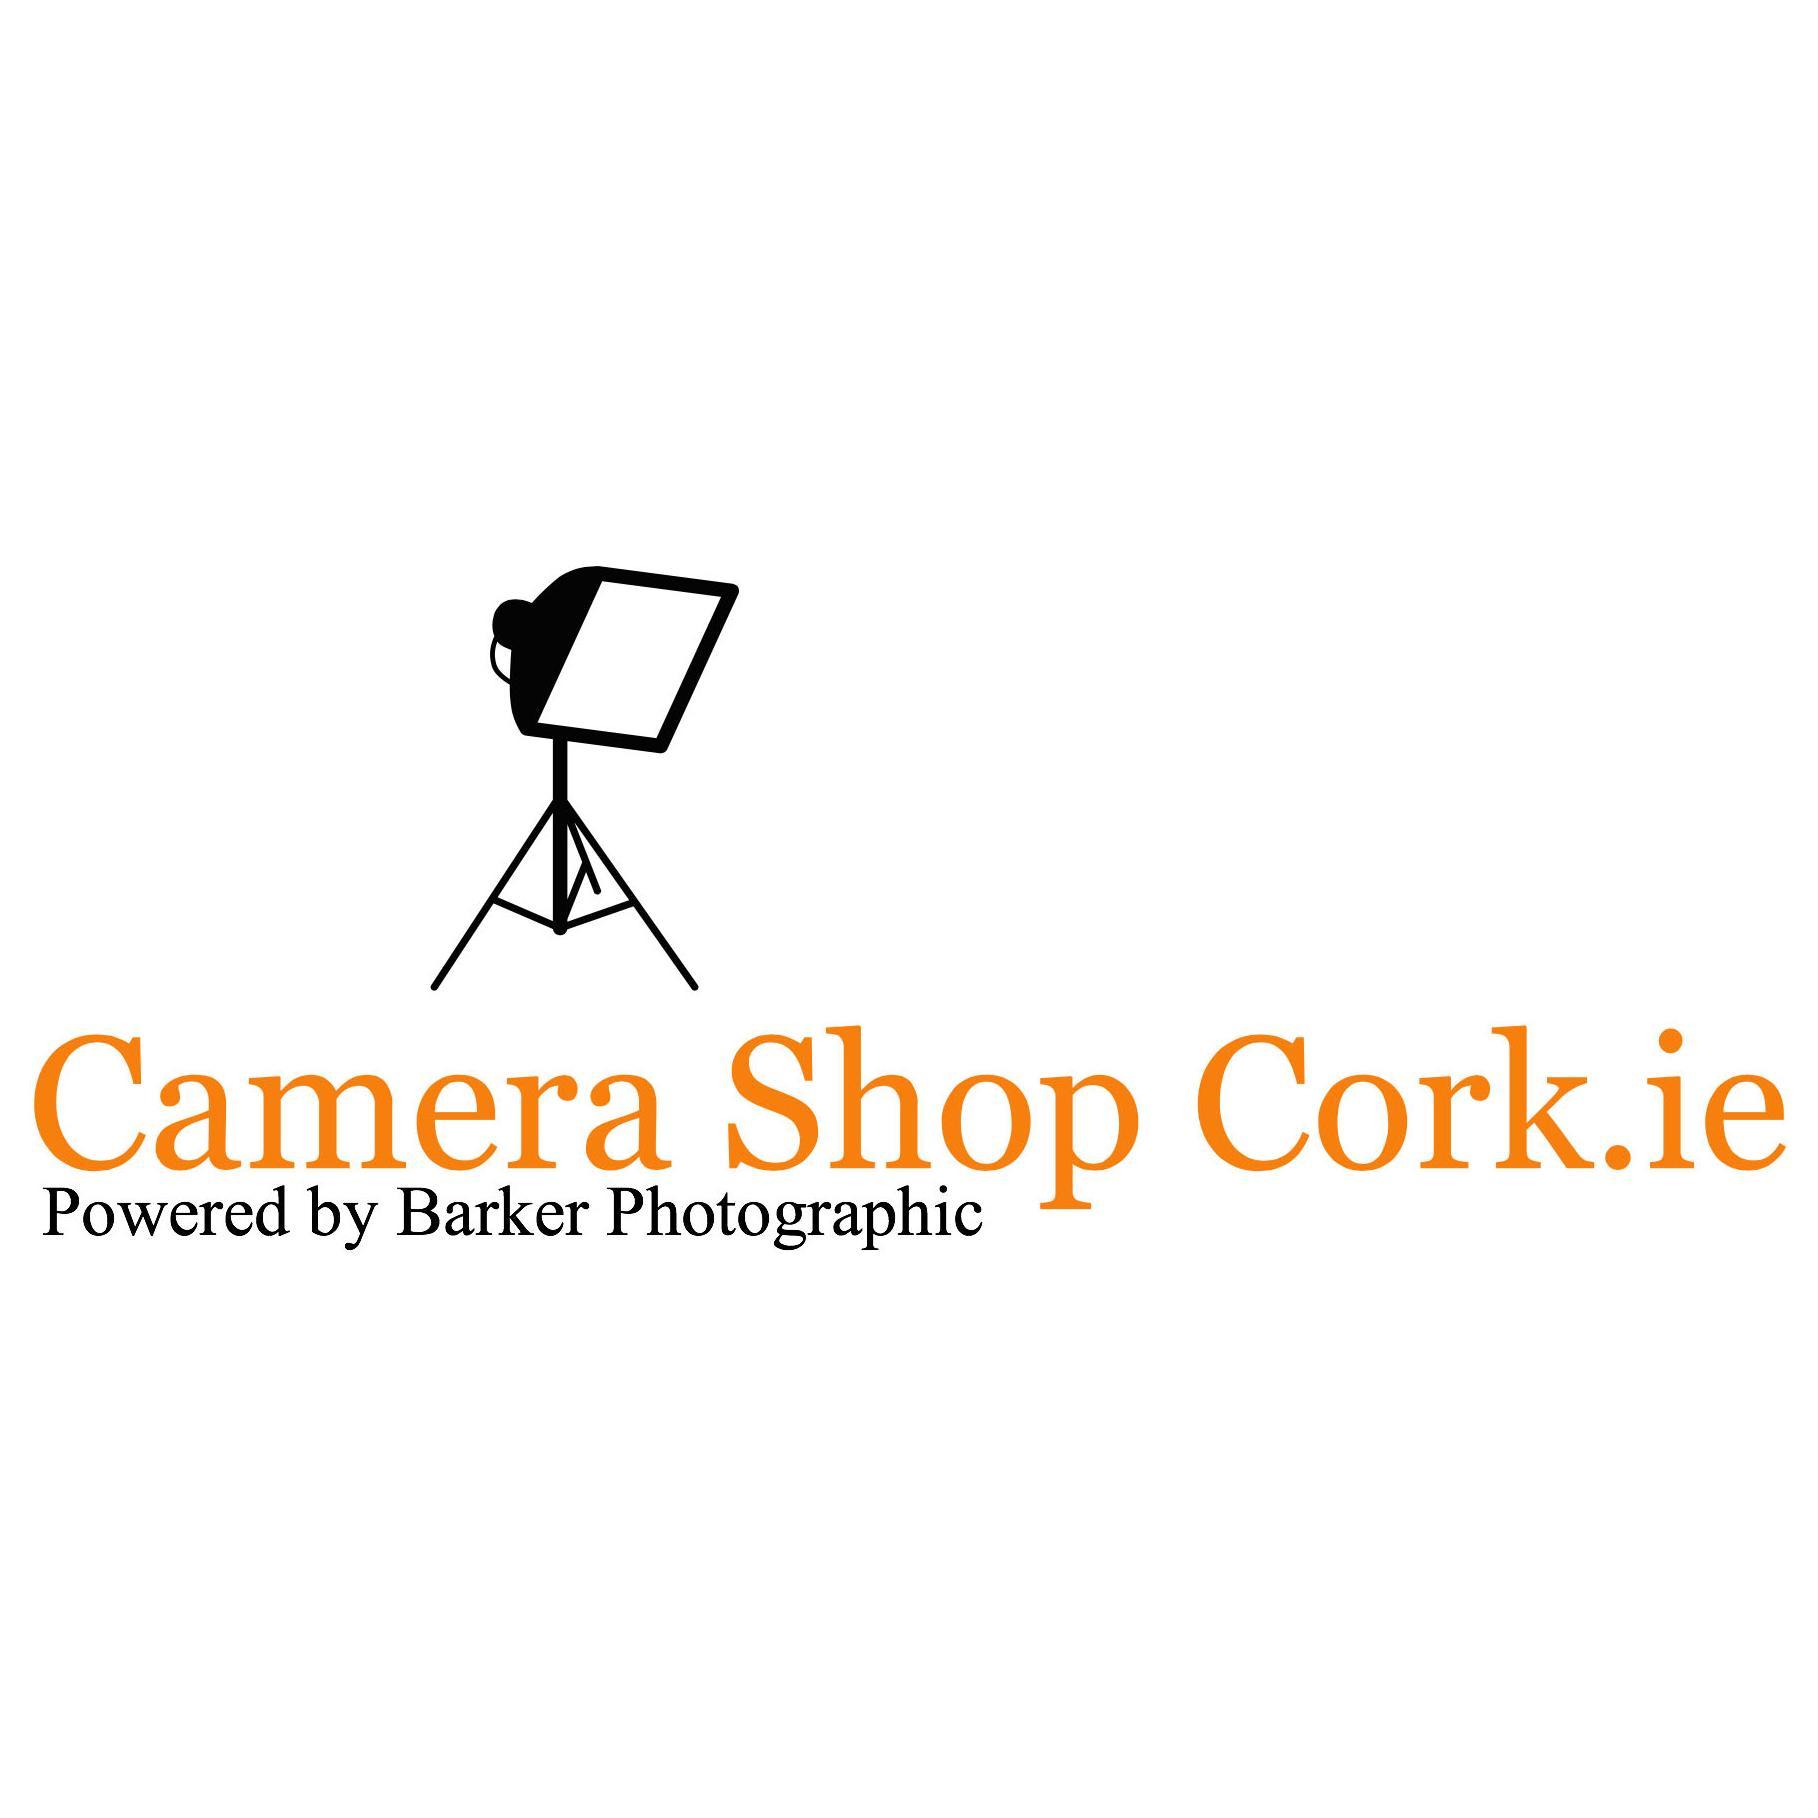 Camera Shop Cork is another name for Barker Photographic. Canon, GoPro, Nikon, Sigma, Lee Filters, Elinchrom, Manfrotto all stocked